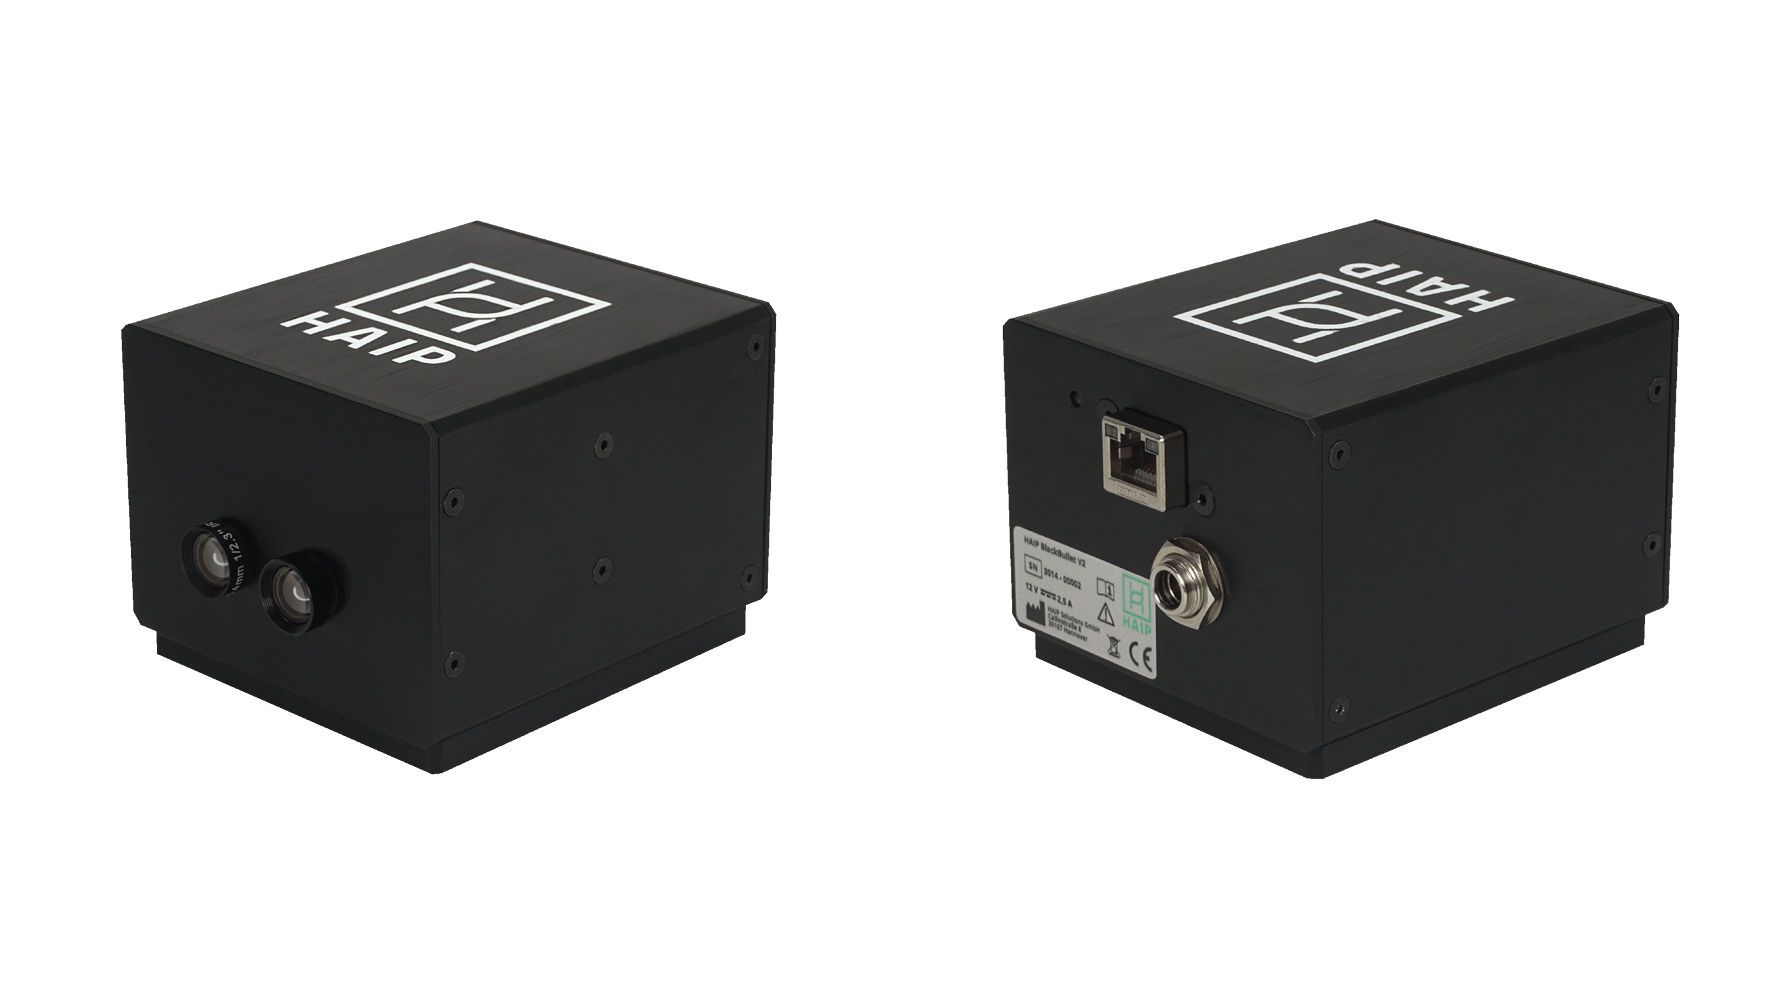 backside and frontside of a hyperspectral camera called BlackBox V2 from the company HAIP Solutions